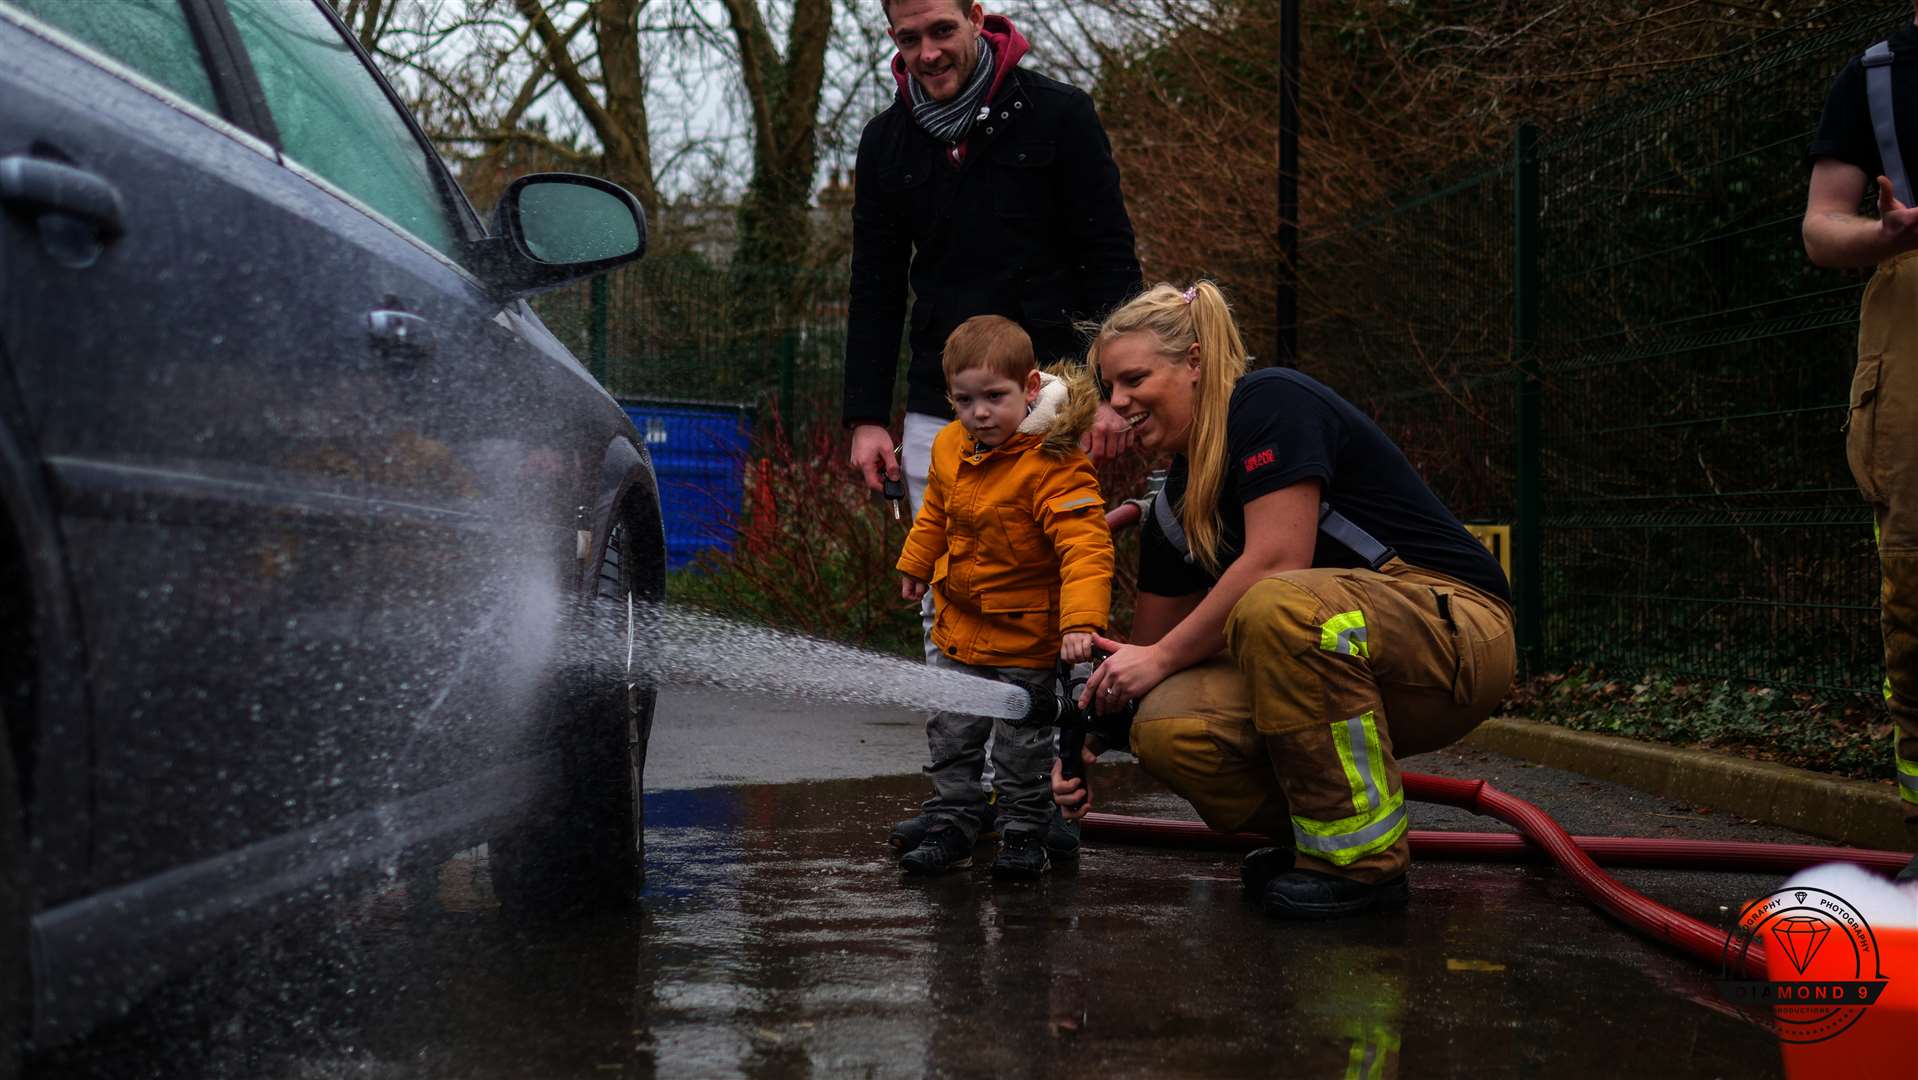 Nearly £1,000 was raised for The Fire Fighters Charity. Picture: Diamond 9 Productions